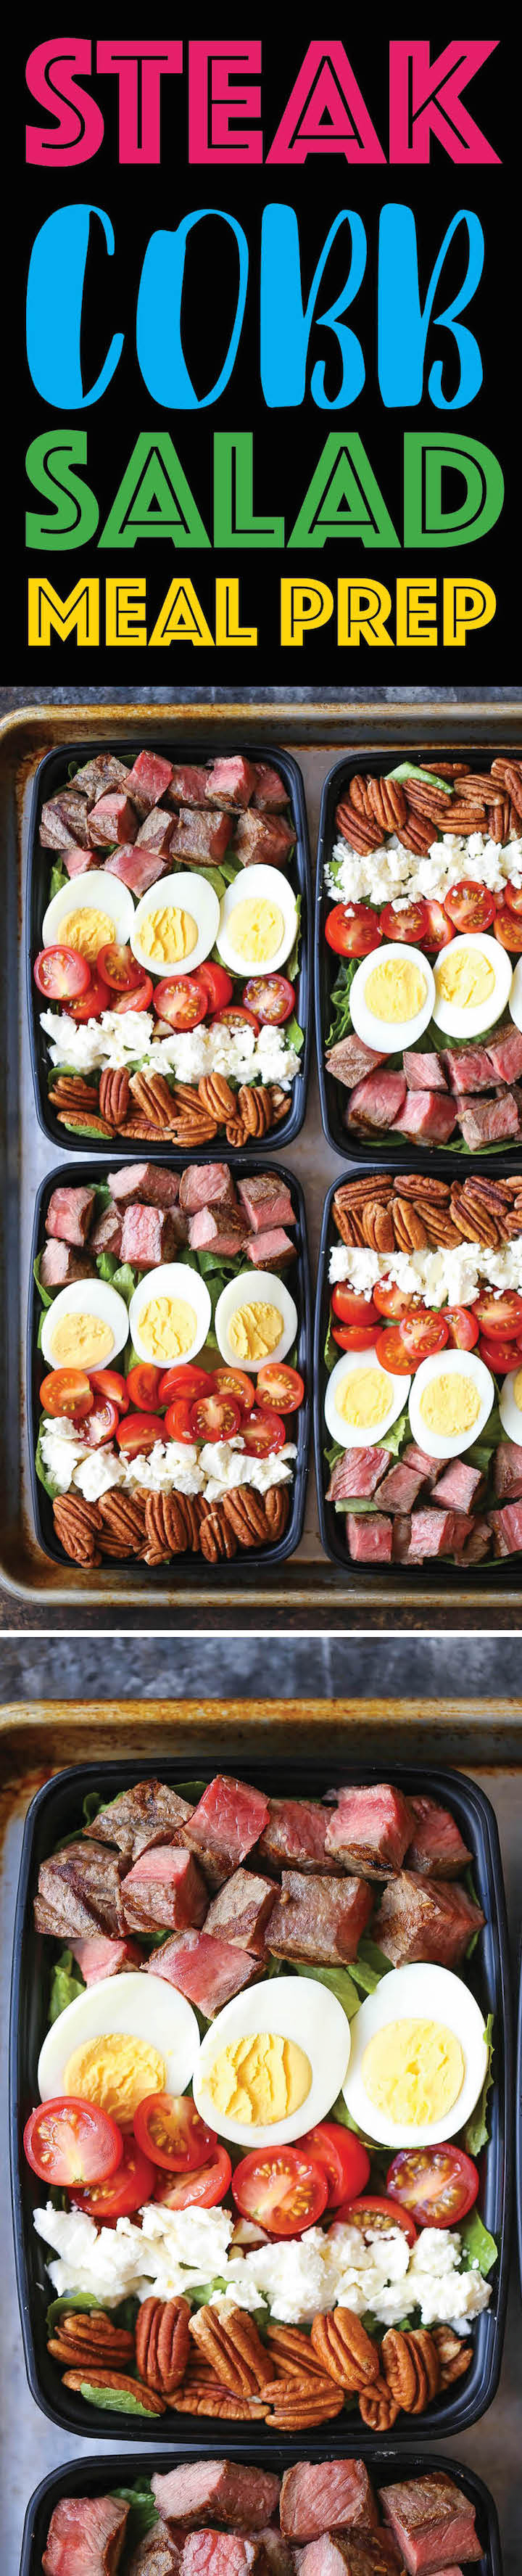 Steak Cobb Salad Meal Prep - Prep for the week ahead! Loaded with protein, nutrients and greens! Plus, this is low carb, easy peasy and budget-friendly.